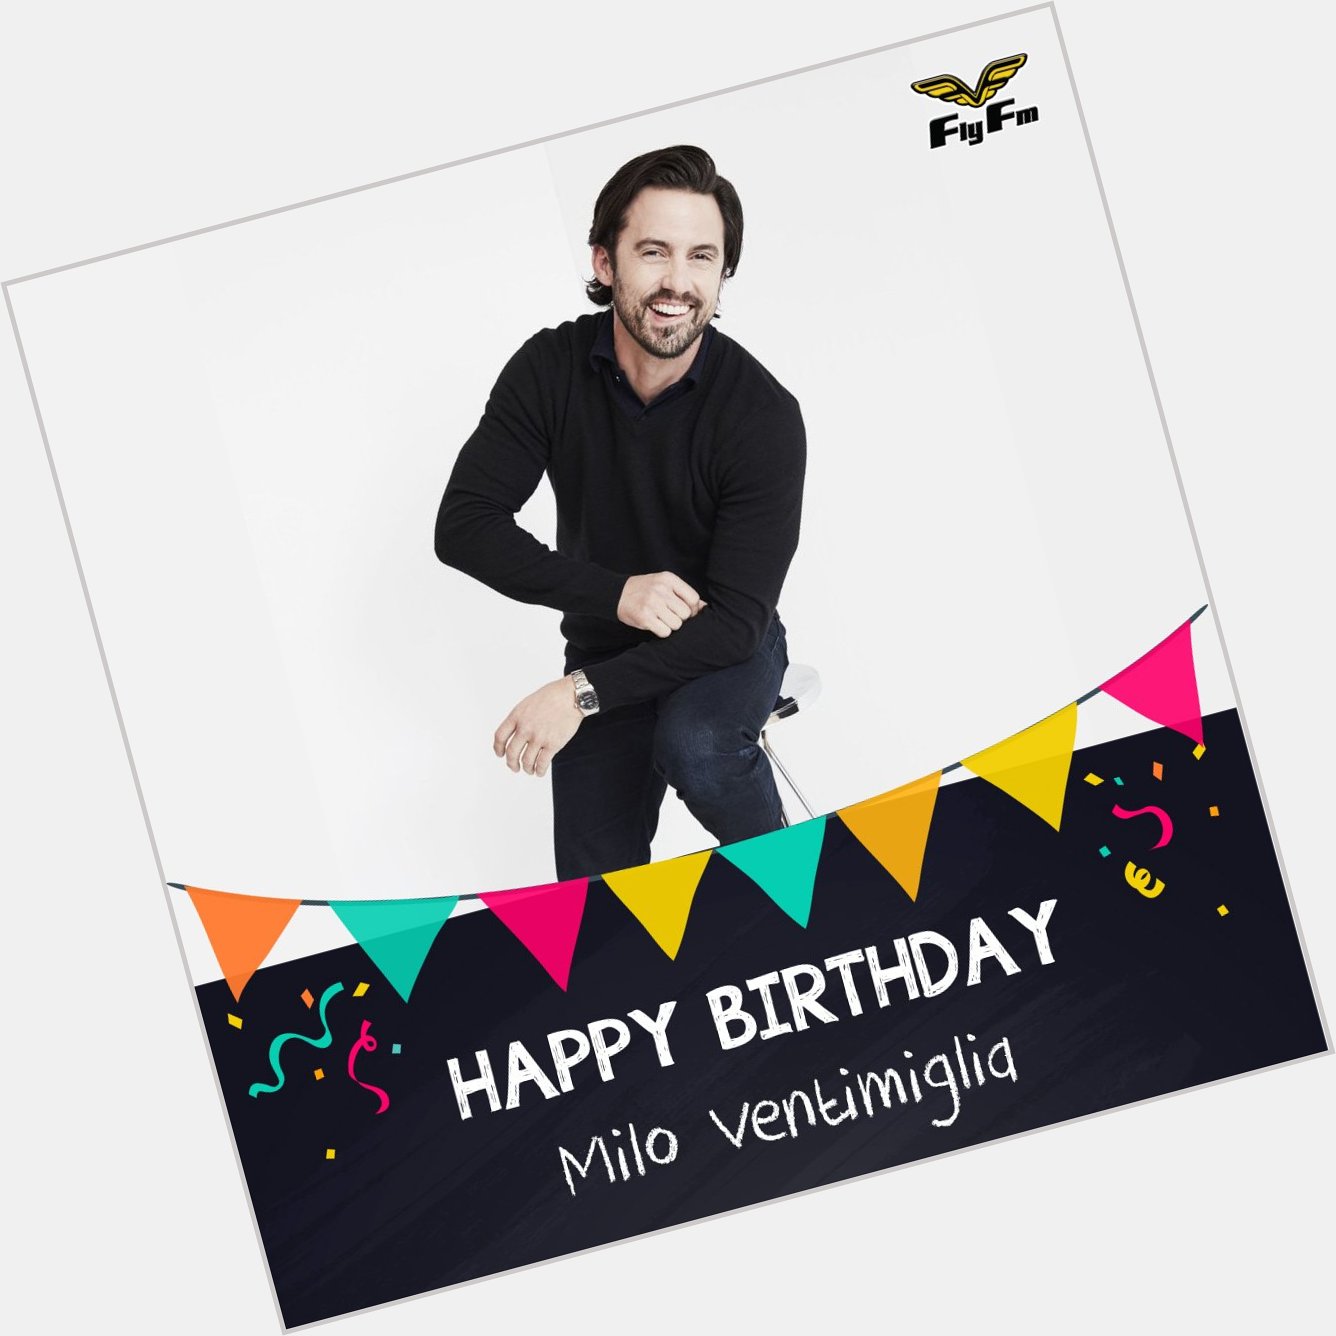 This is us wishing Milo Ventimiglia a very HAPPY BIRTHDAY as the actor turns the big 40!! 